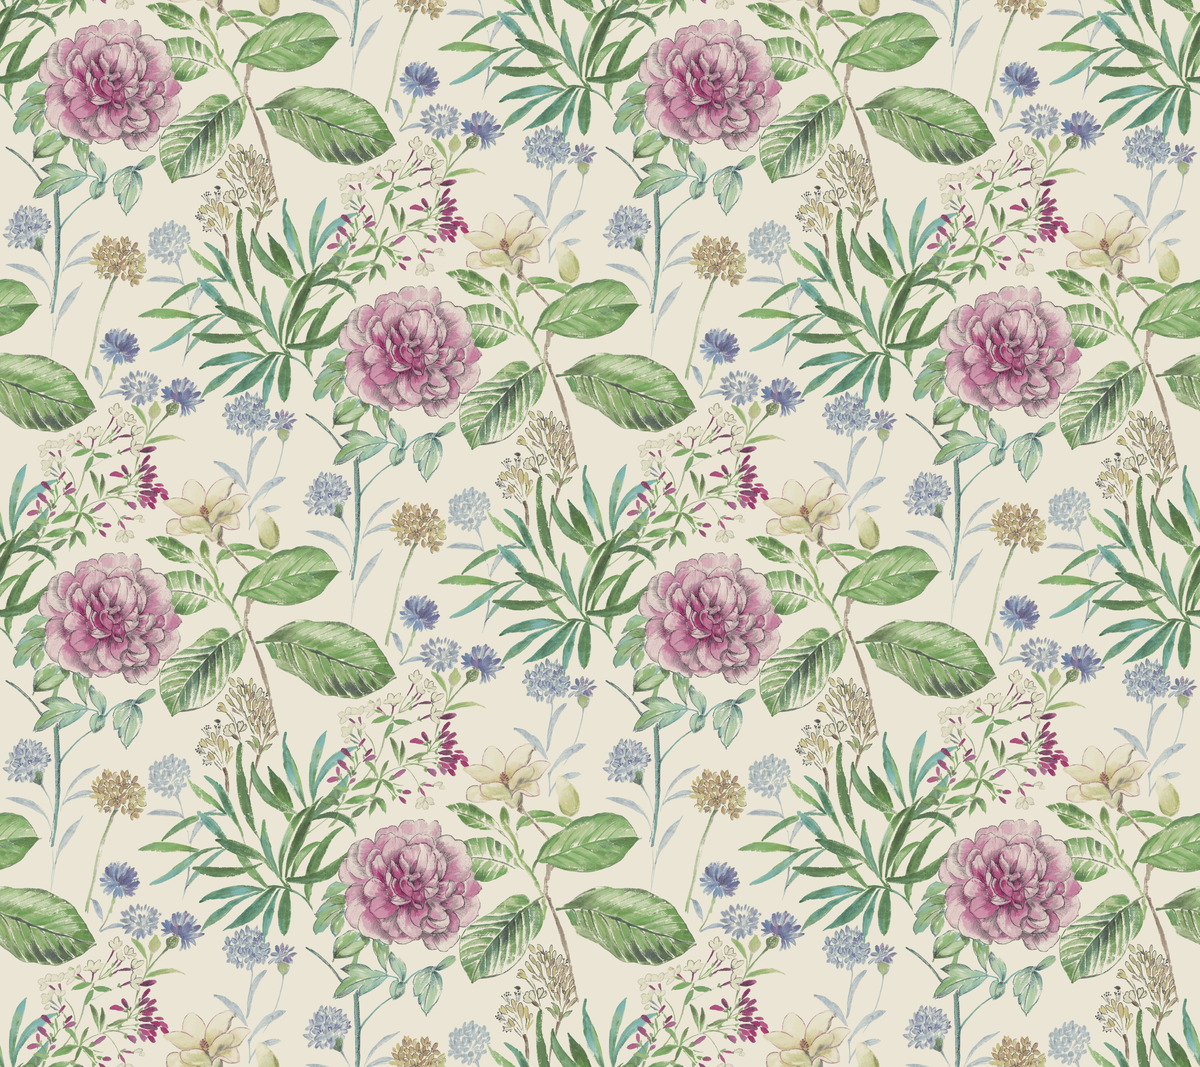 Midsummer Floral Wallpaper |Wallpaper And Borders |The Mural Store